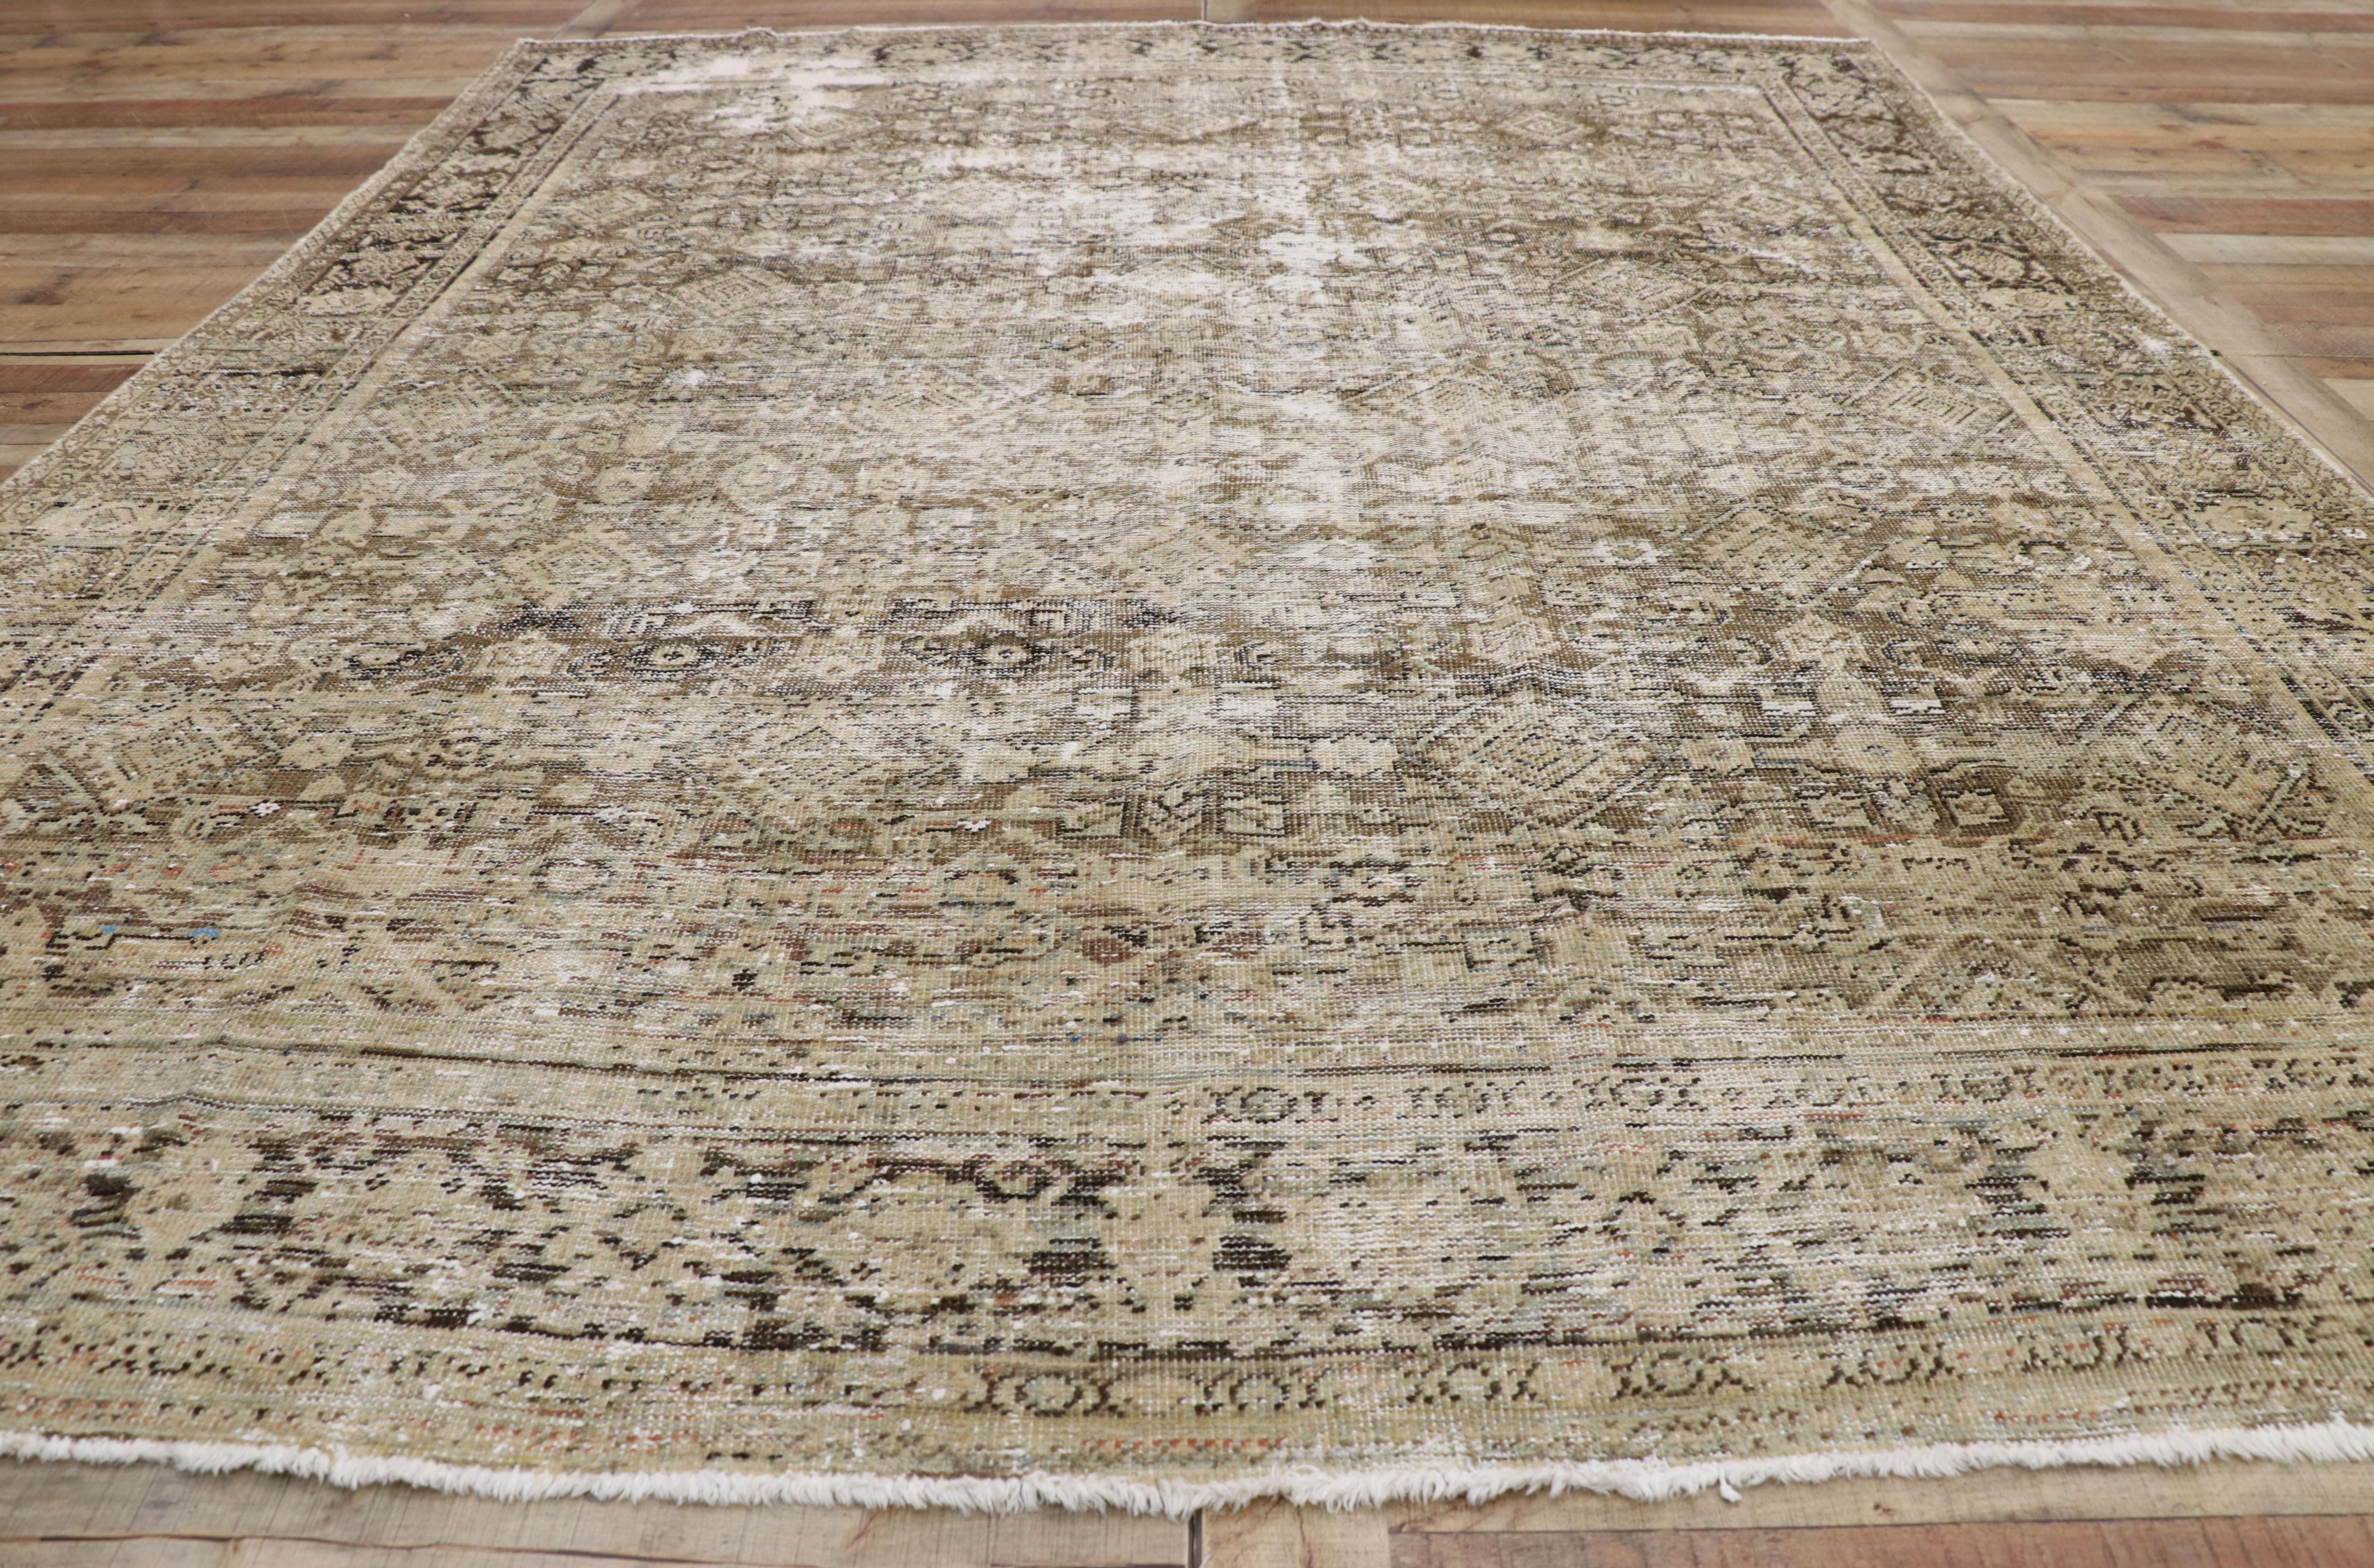 Distressed Antique Persian Mahal Rug with Modern Rustic English Manor Style For Sale 1